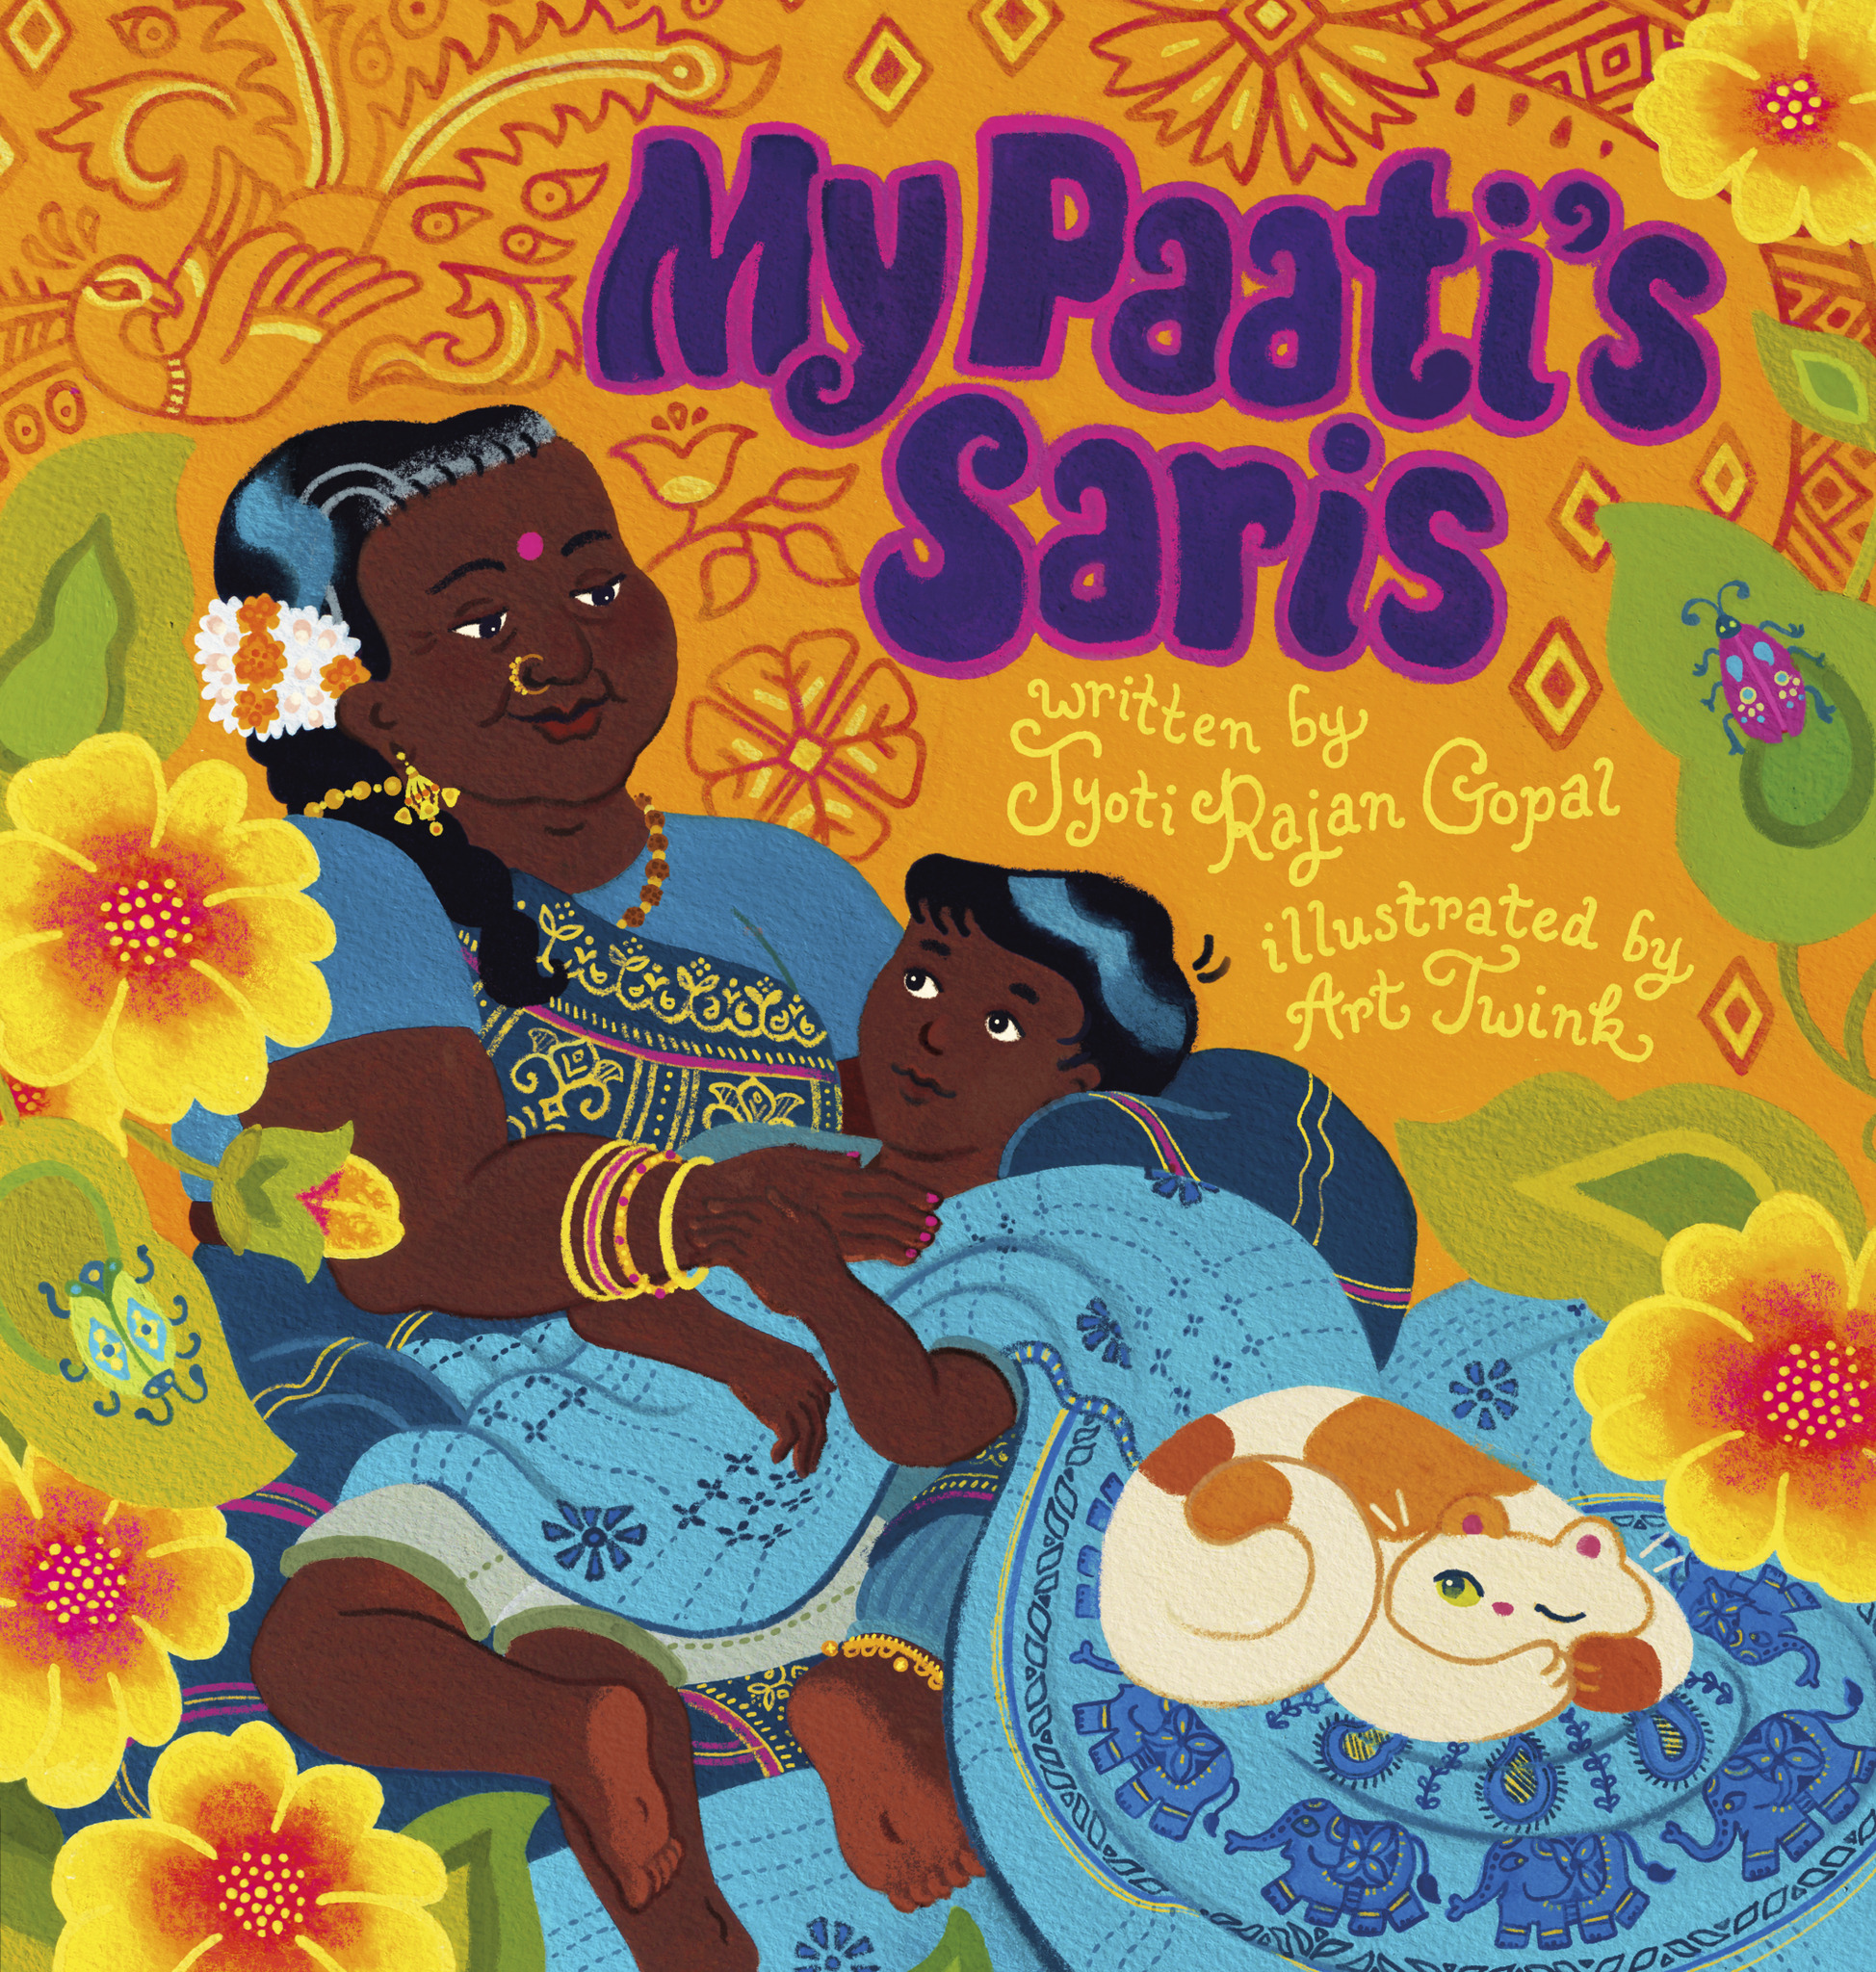 Book Review: ‘My Paati’s Saris’ Is A Moving, Multi-Layered Narrative For Young Readers